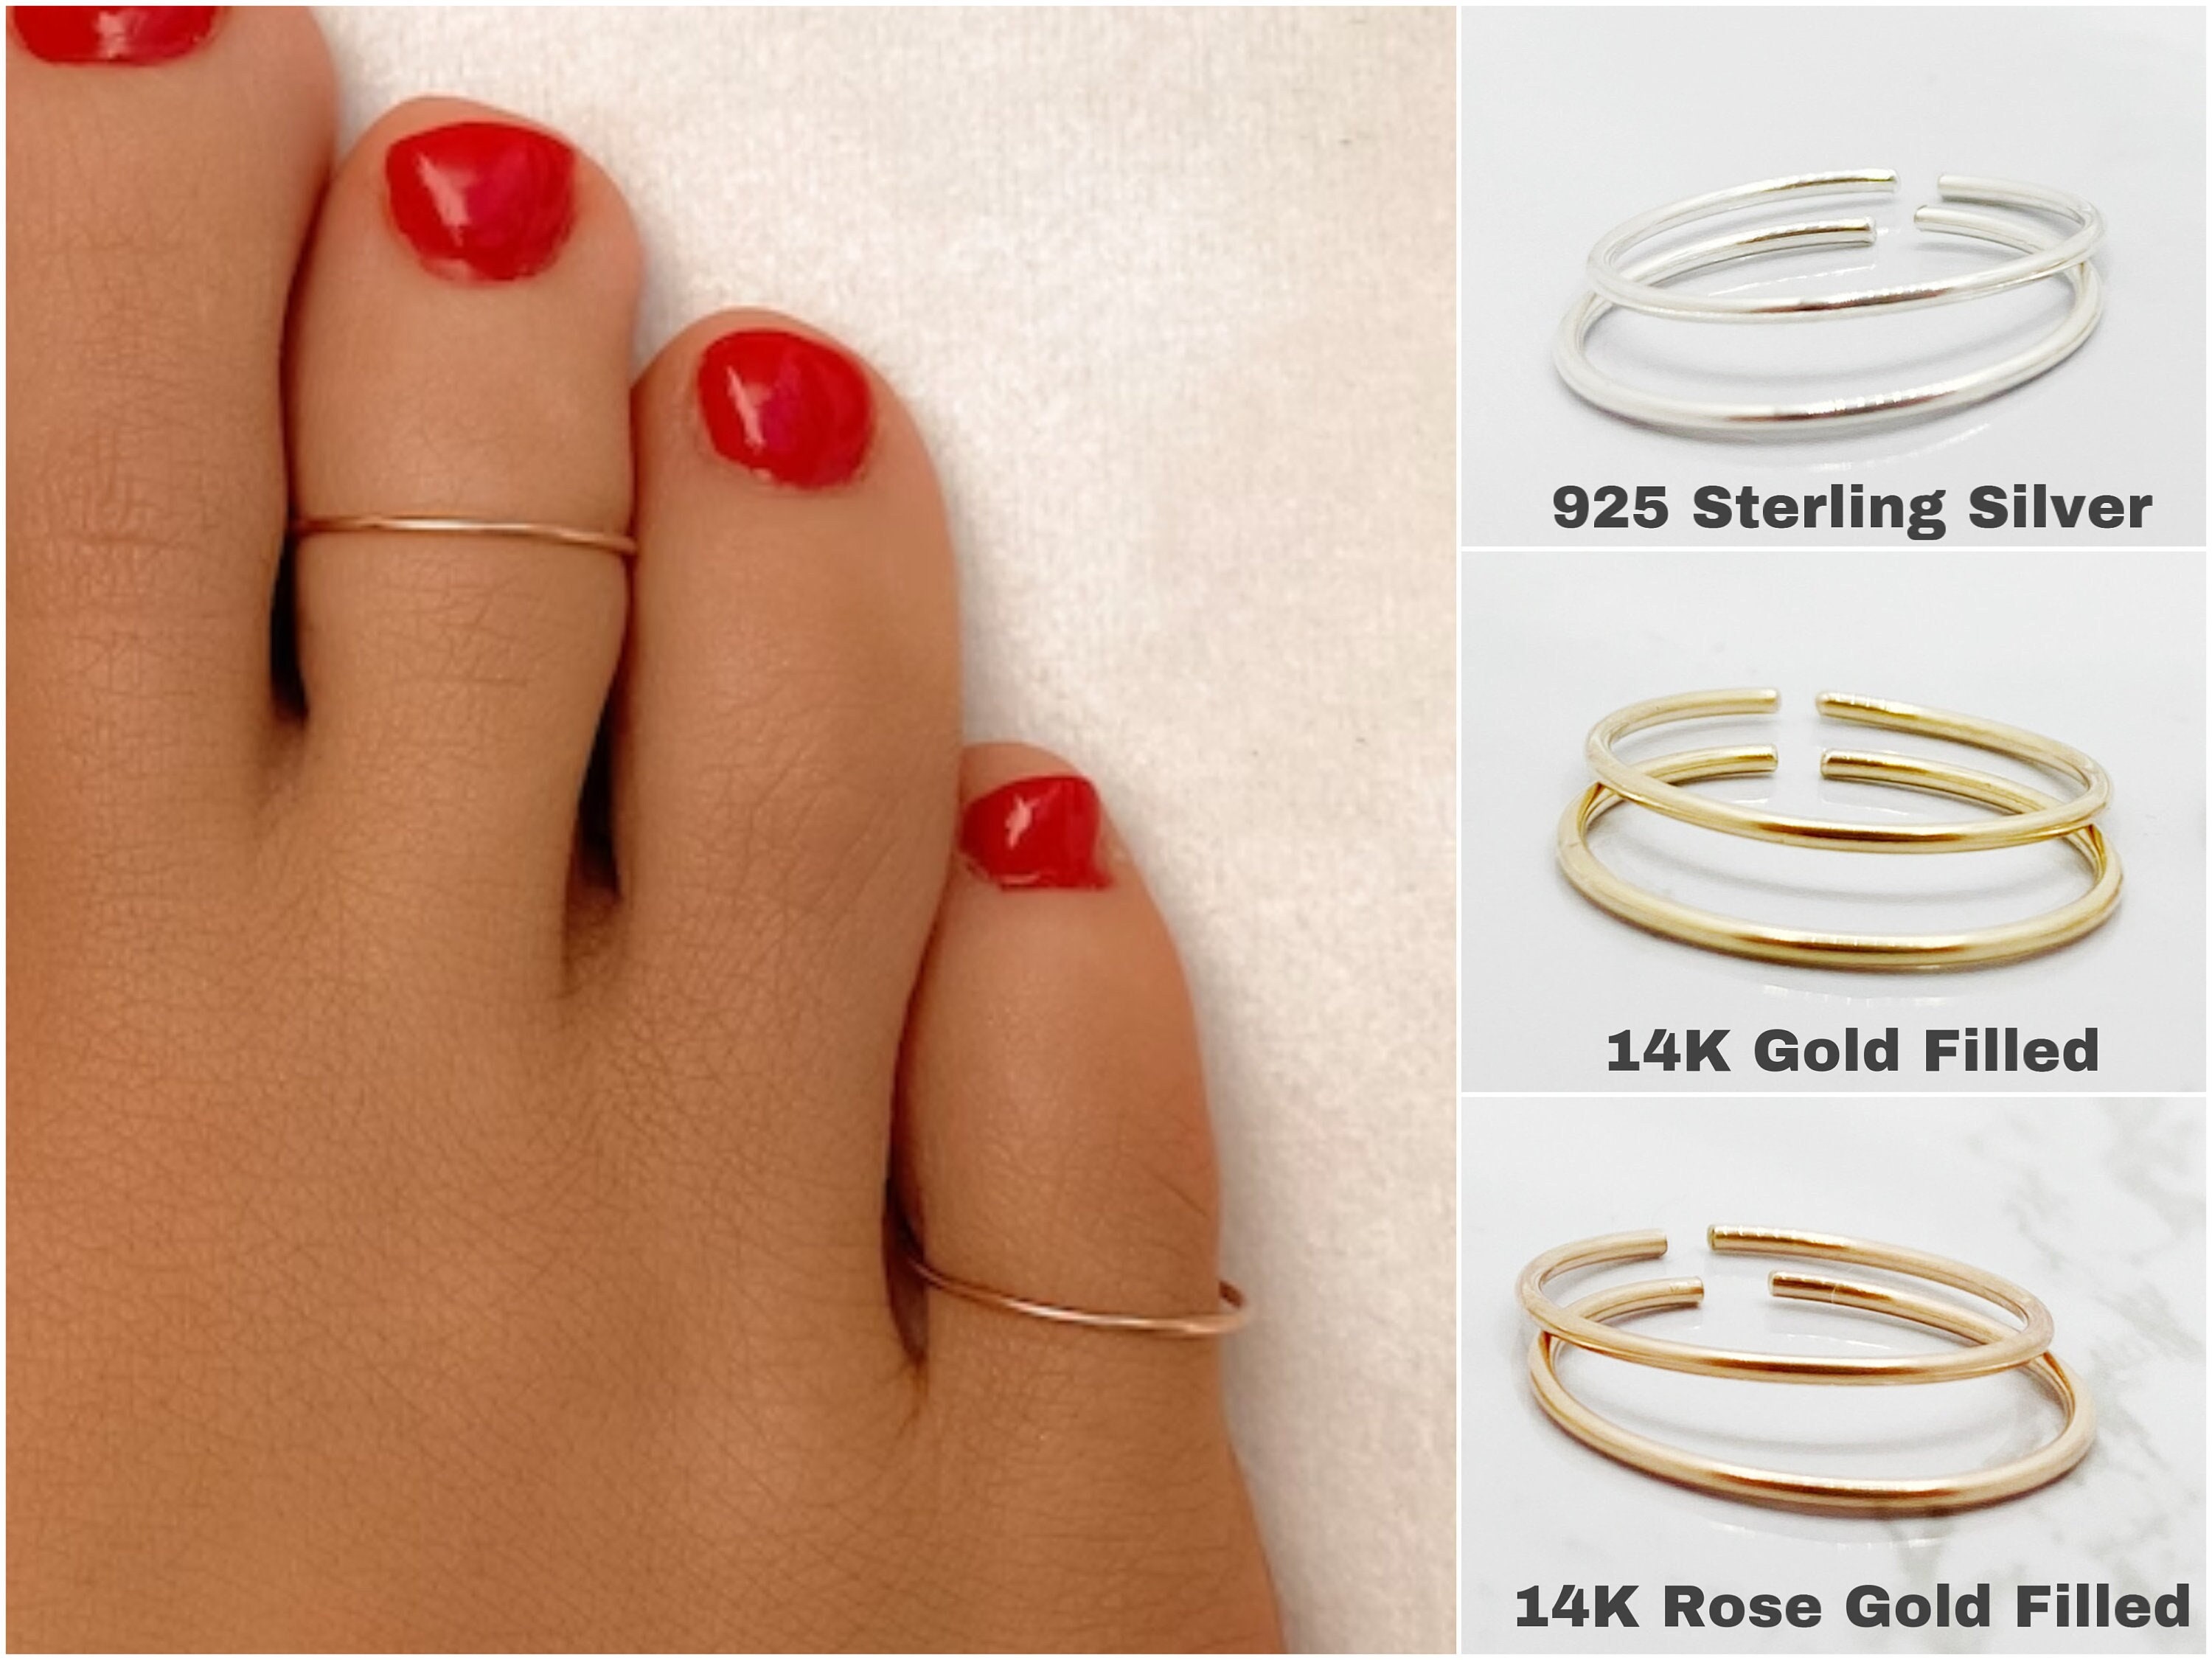 Gold Plated Beaded Gold Toe Ring Jewellery Regular Sale Price – Saraf RS  Jewellery